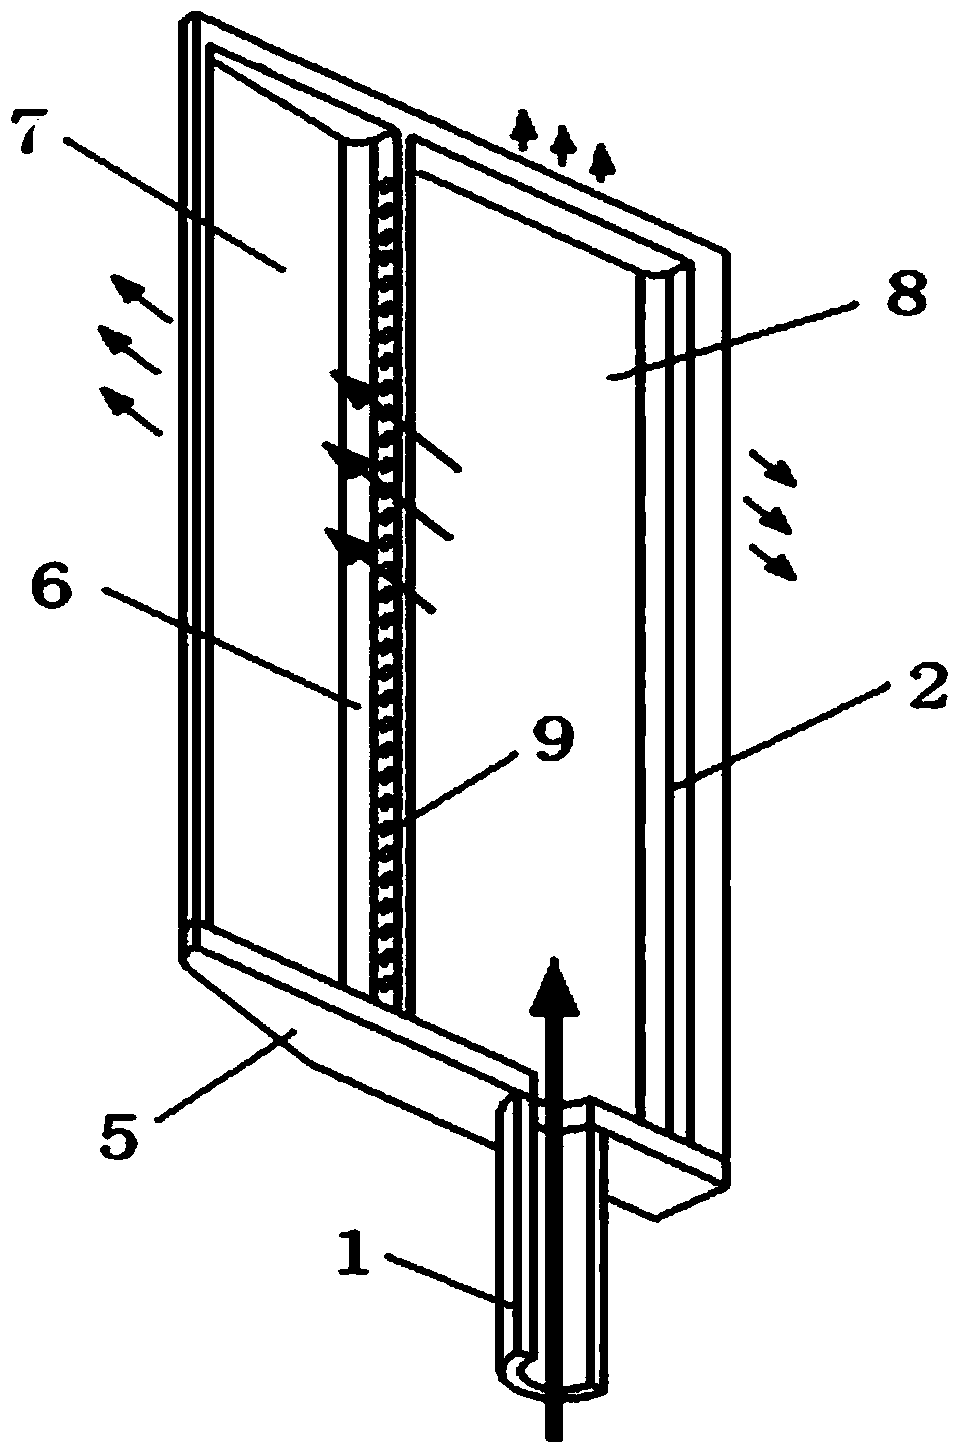 Heat protection method for injection support plate of scramjet engine by utilizing sweat and impingement cooling